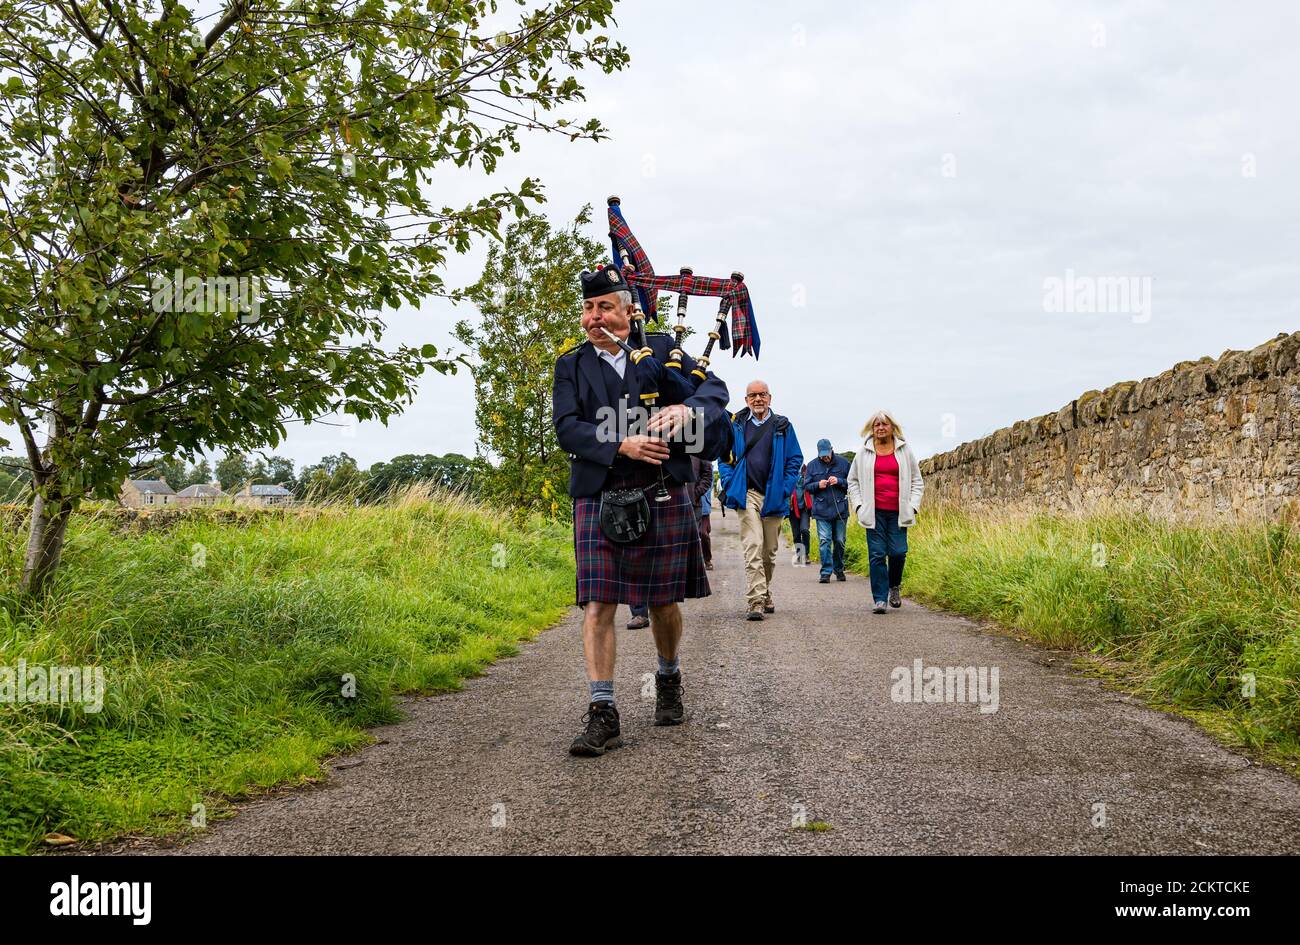 A piper leads a procession at the Battle of Pinkie Cleugh commemoration, East Lothian, Scotland, UK Stock Photo